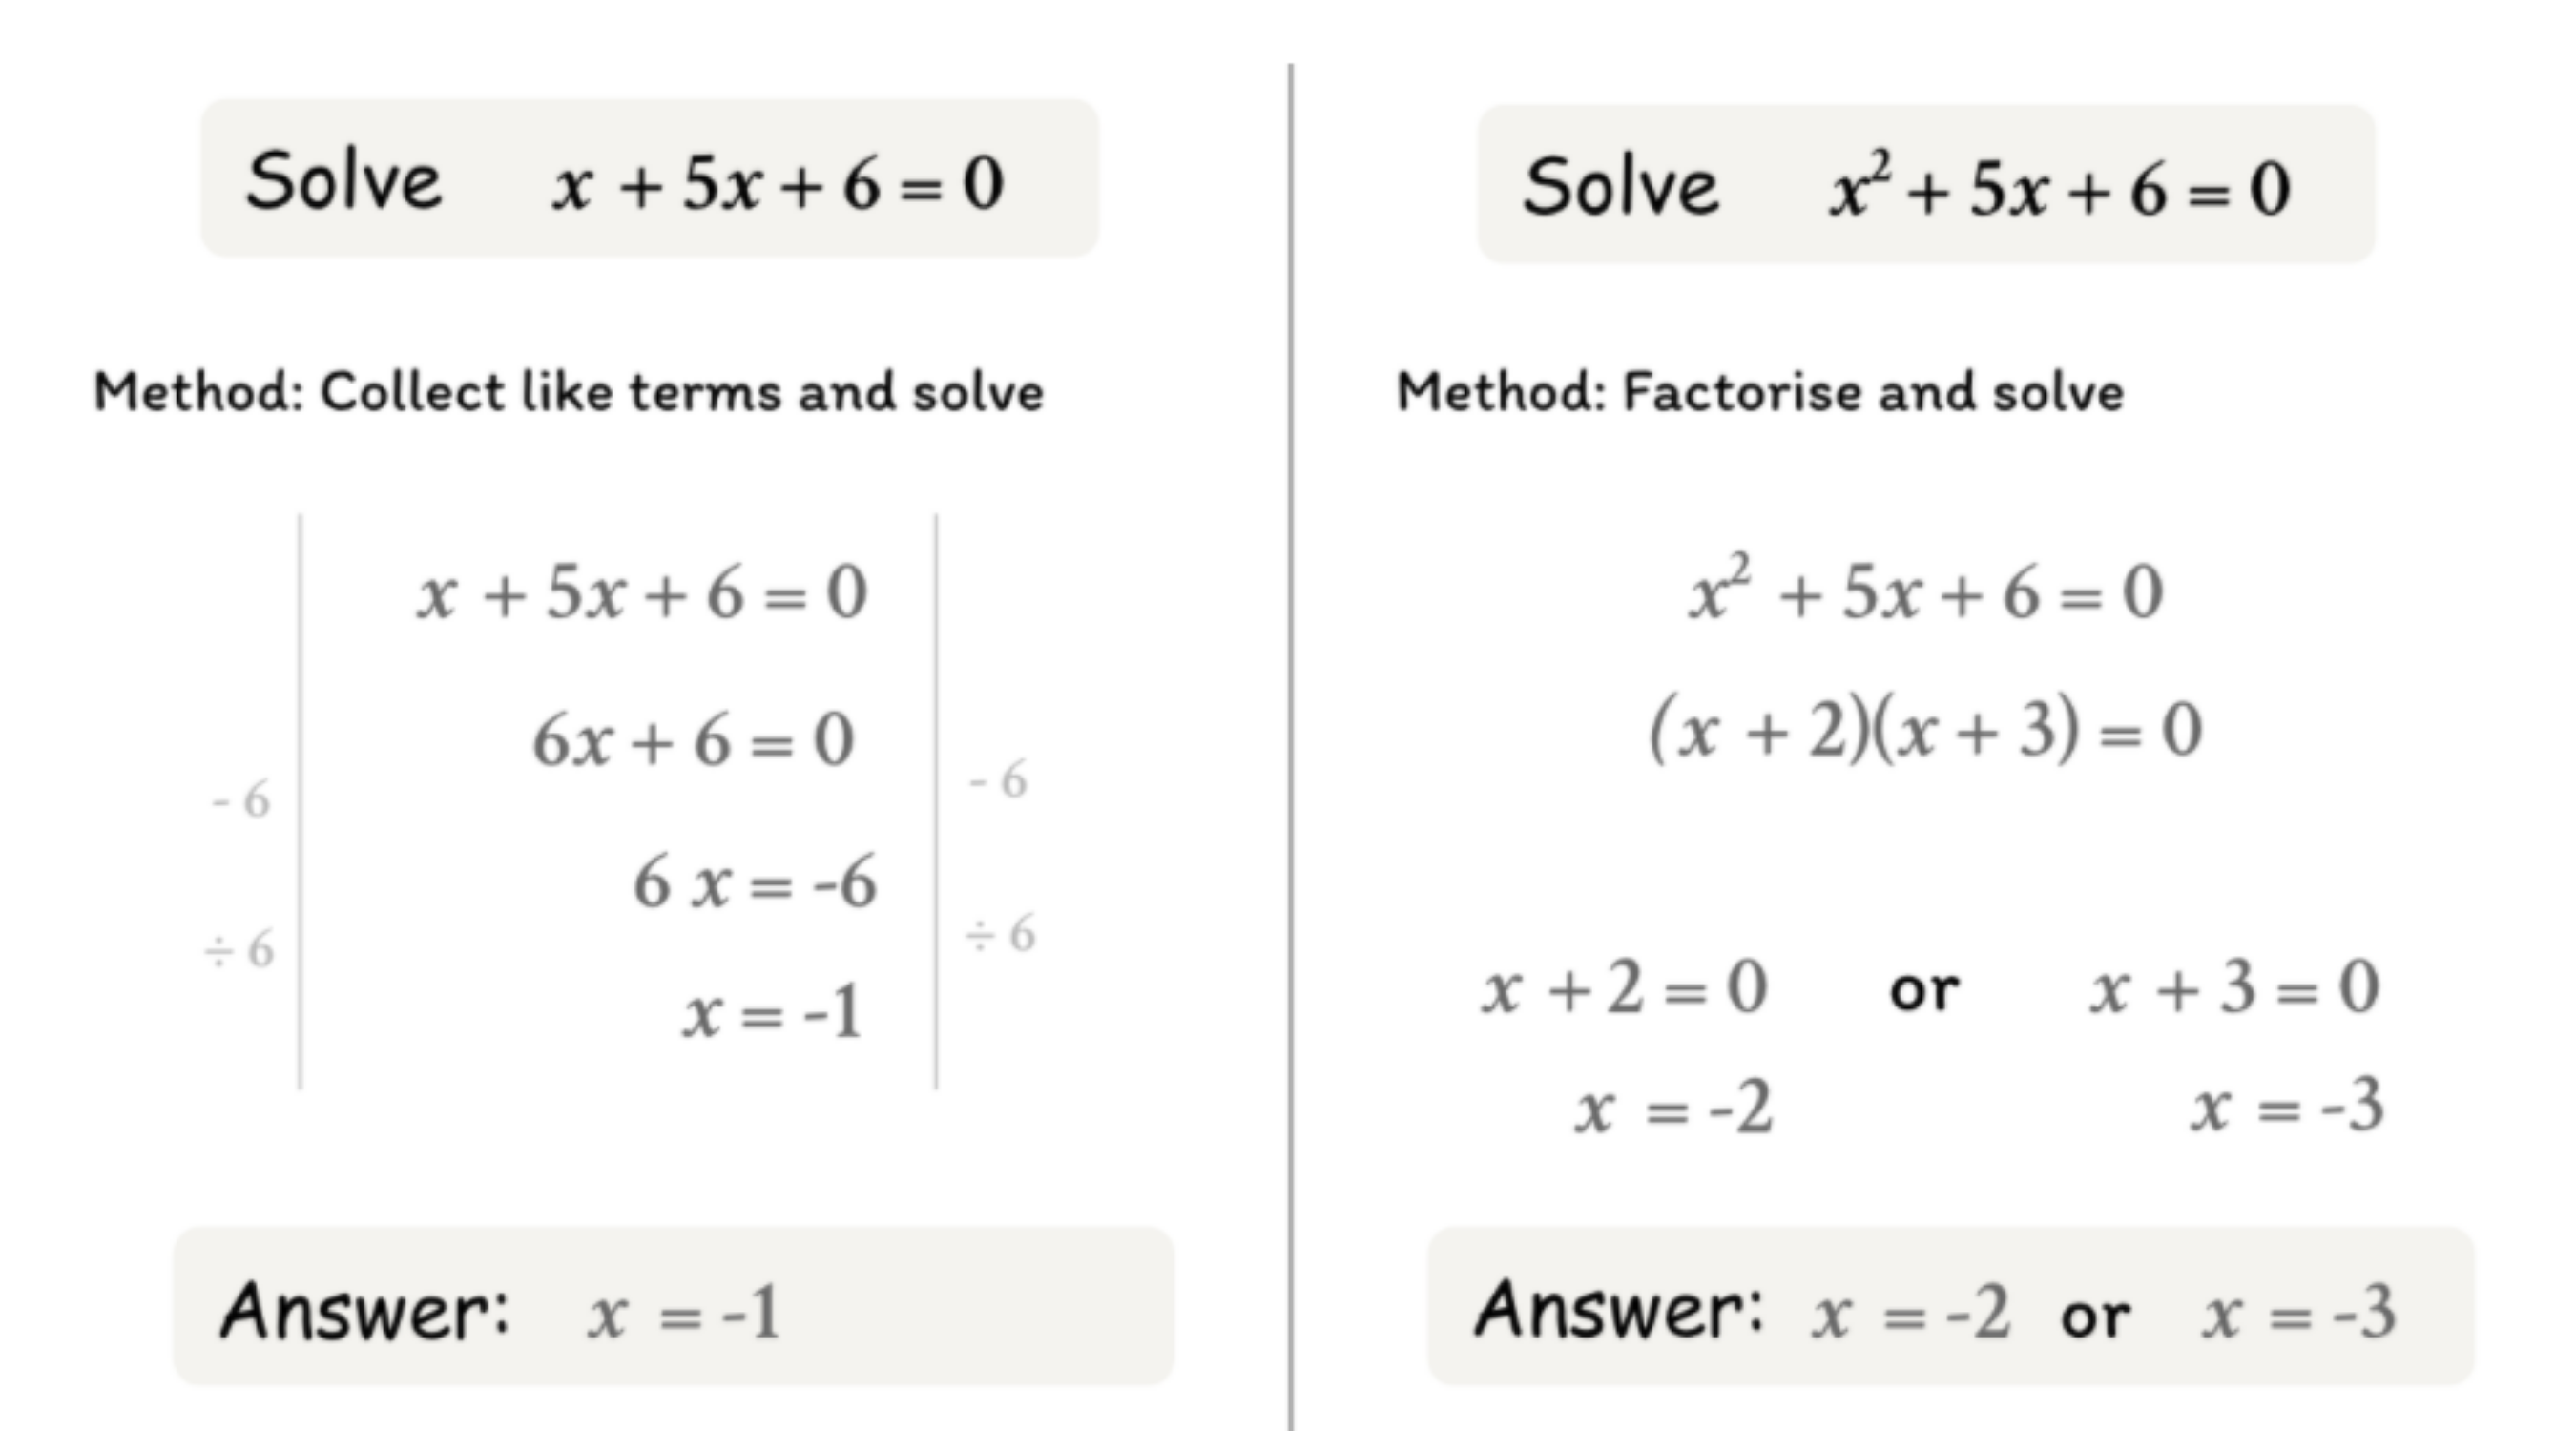 Image shows two similar-looking maths questions that actually require quite different methods to solve.